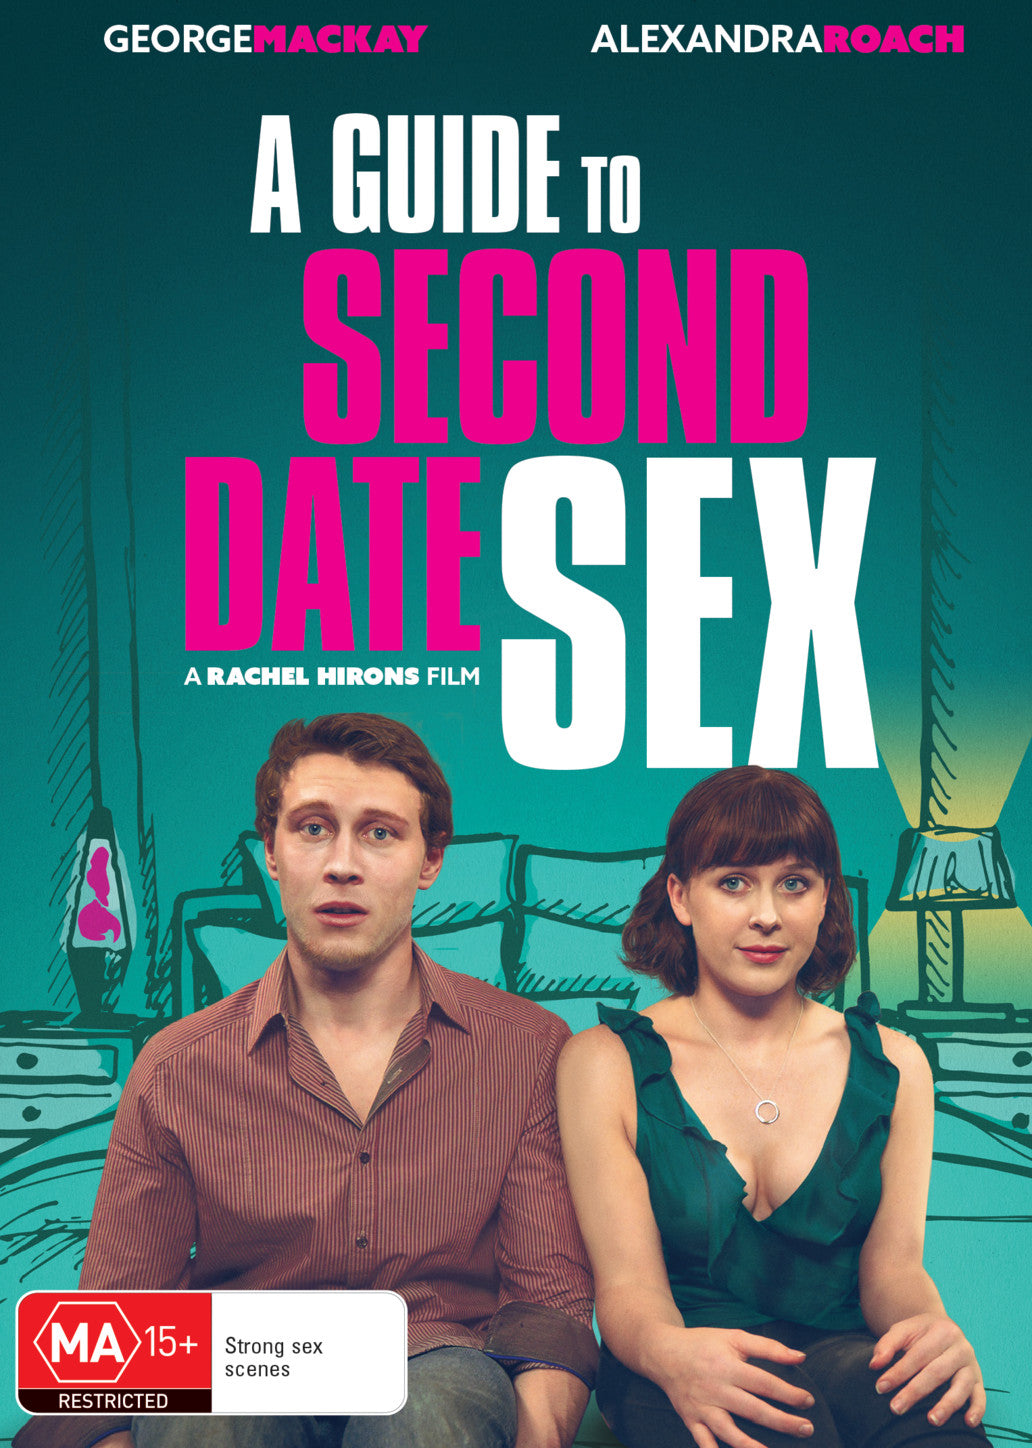 A GUIDE TO SECOND DATE SEX